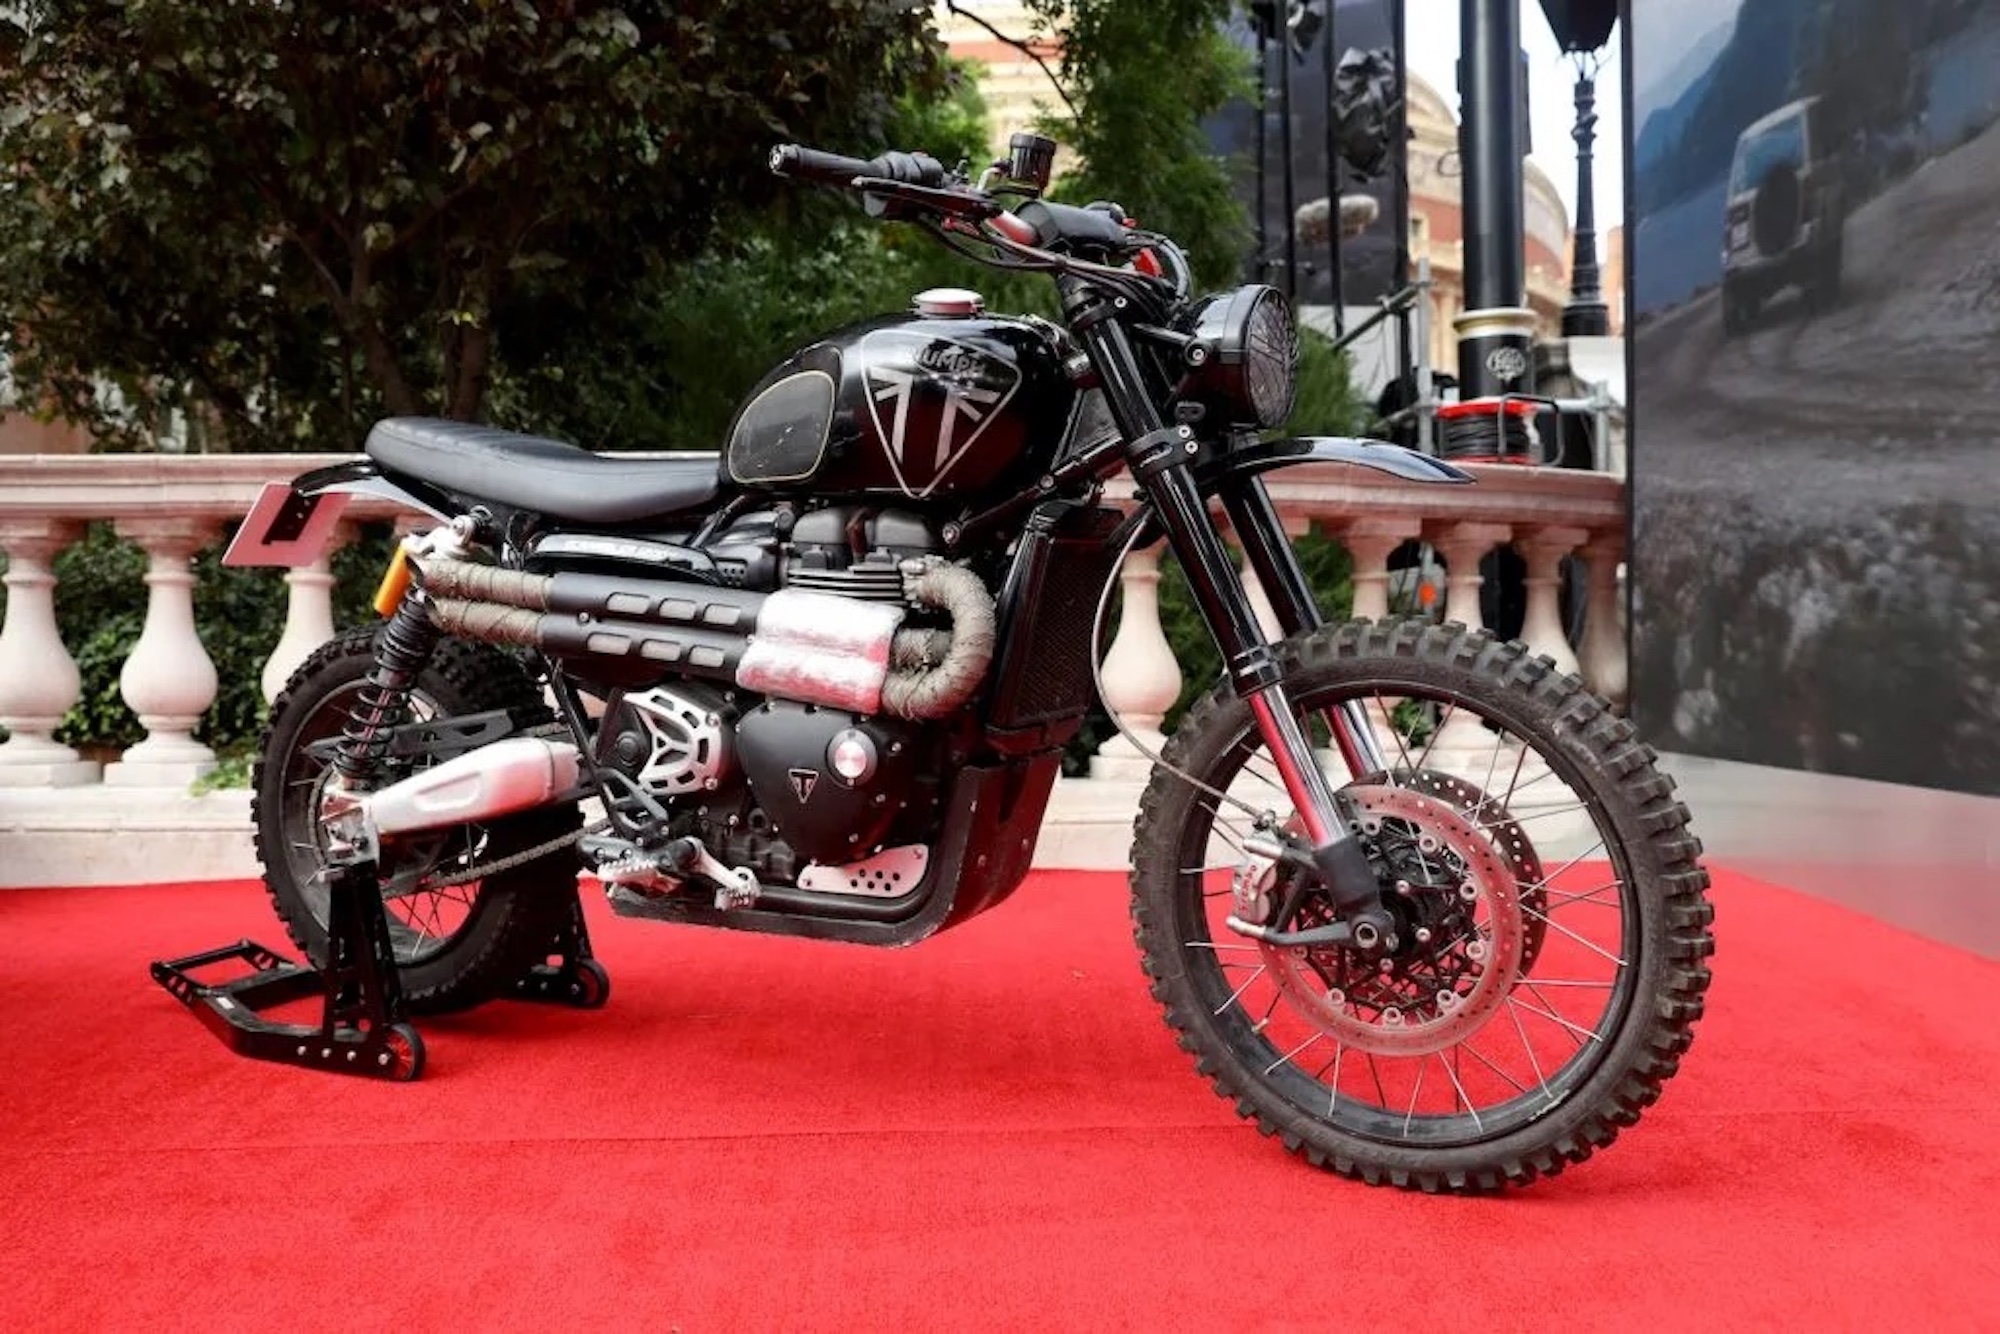 The Scrambler 1200 from "No Time to Die" that is currently up for auction. Media sourced from MotorBiscuit.